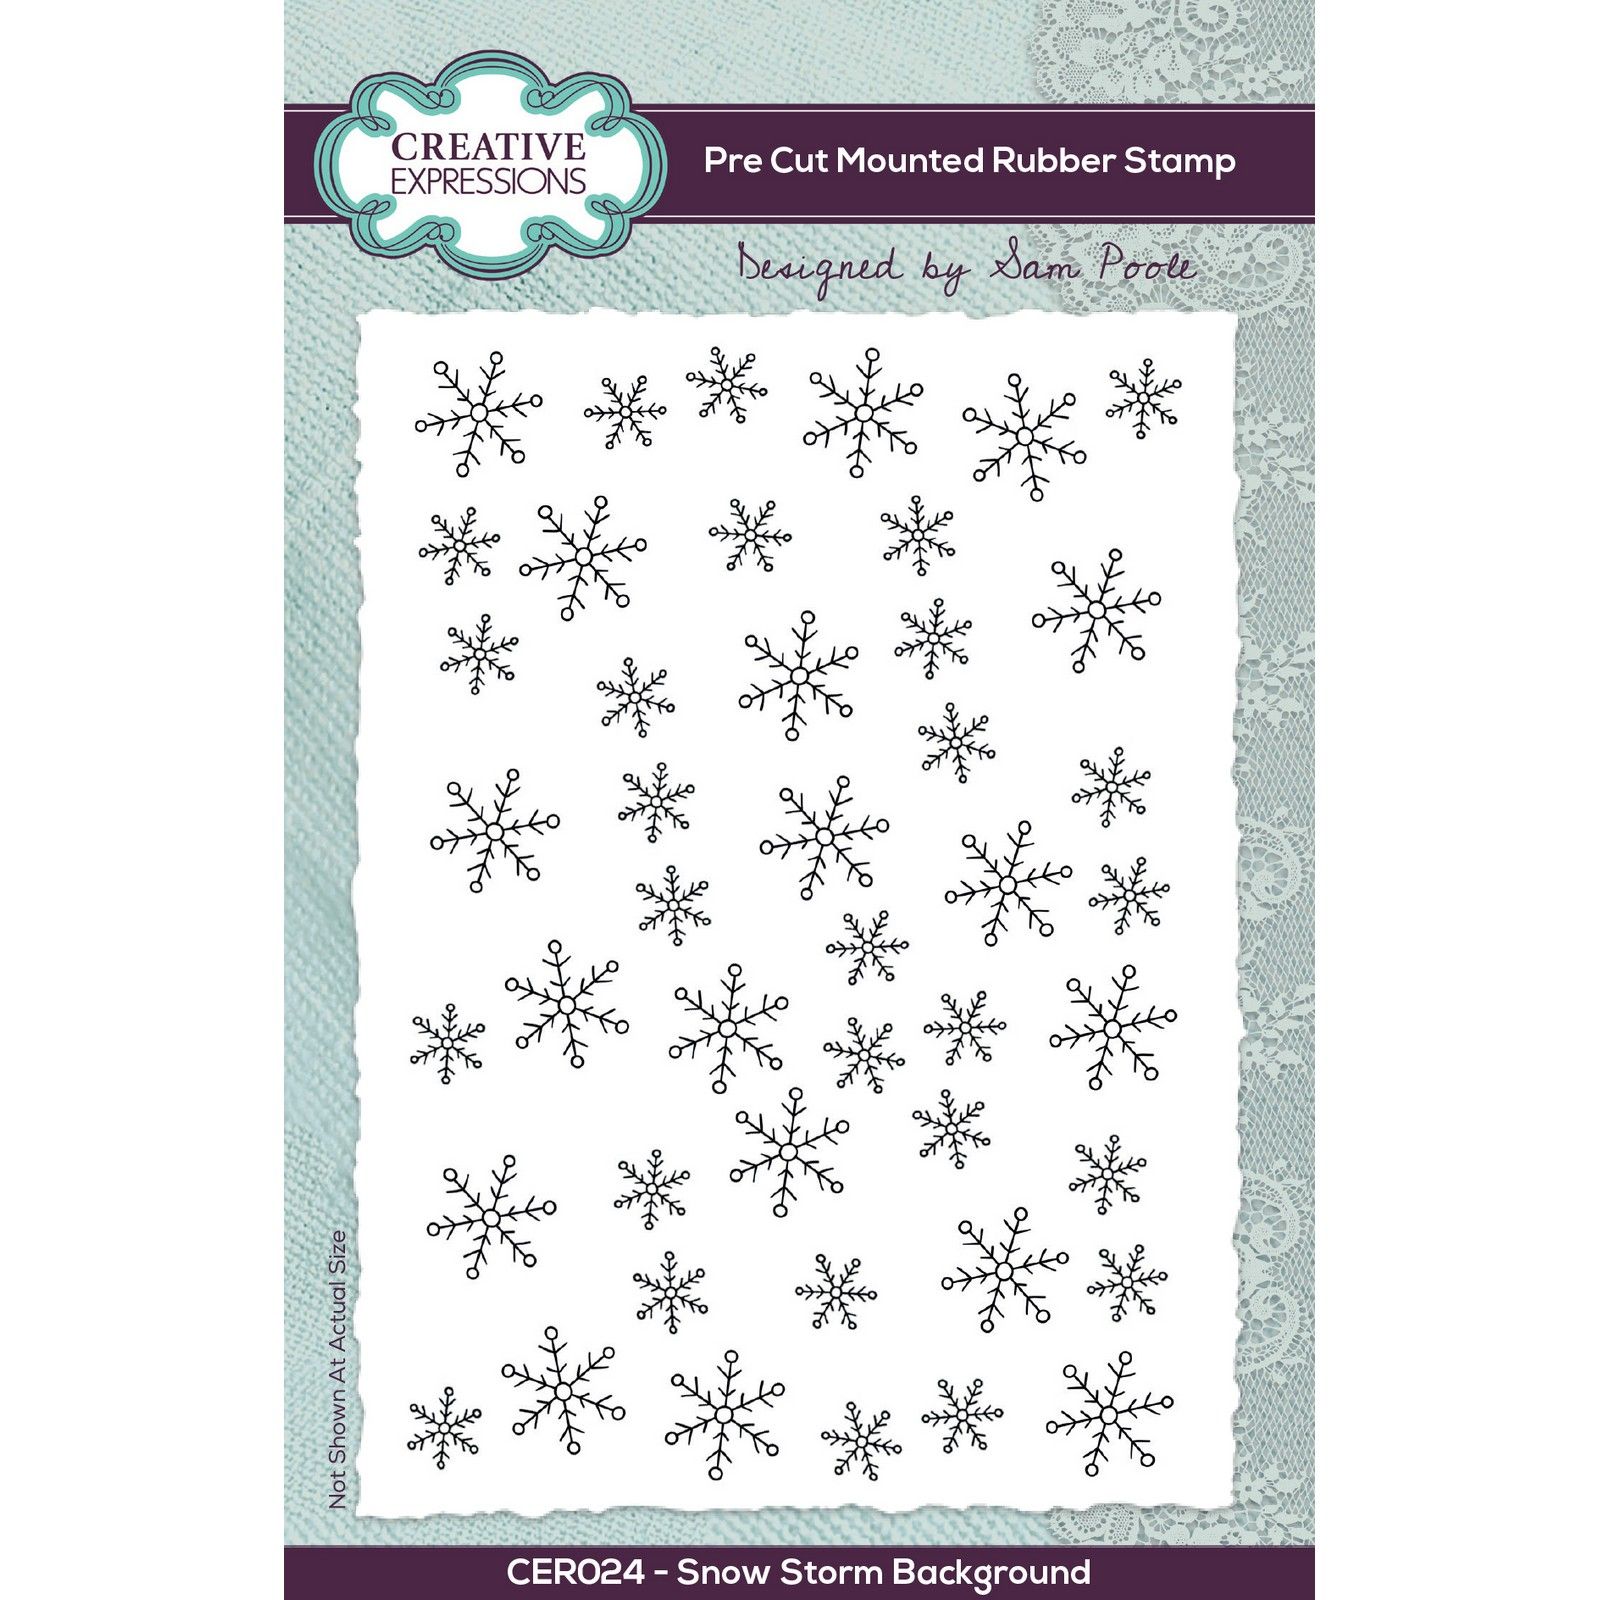 Creative Expressions • Pre Cut Rubber Stamp Snow Storm Background